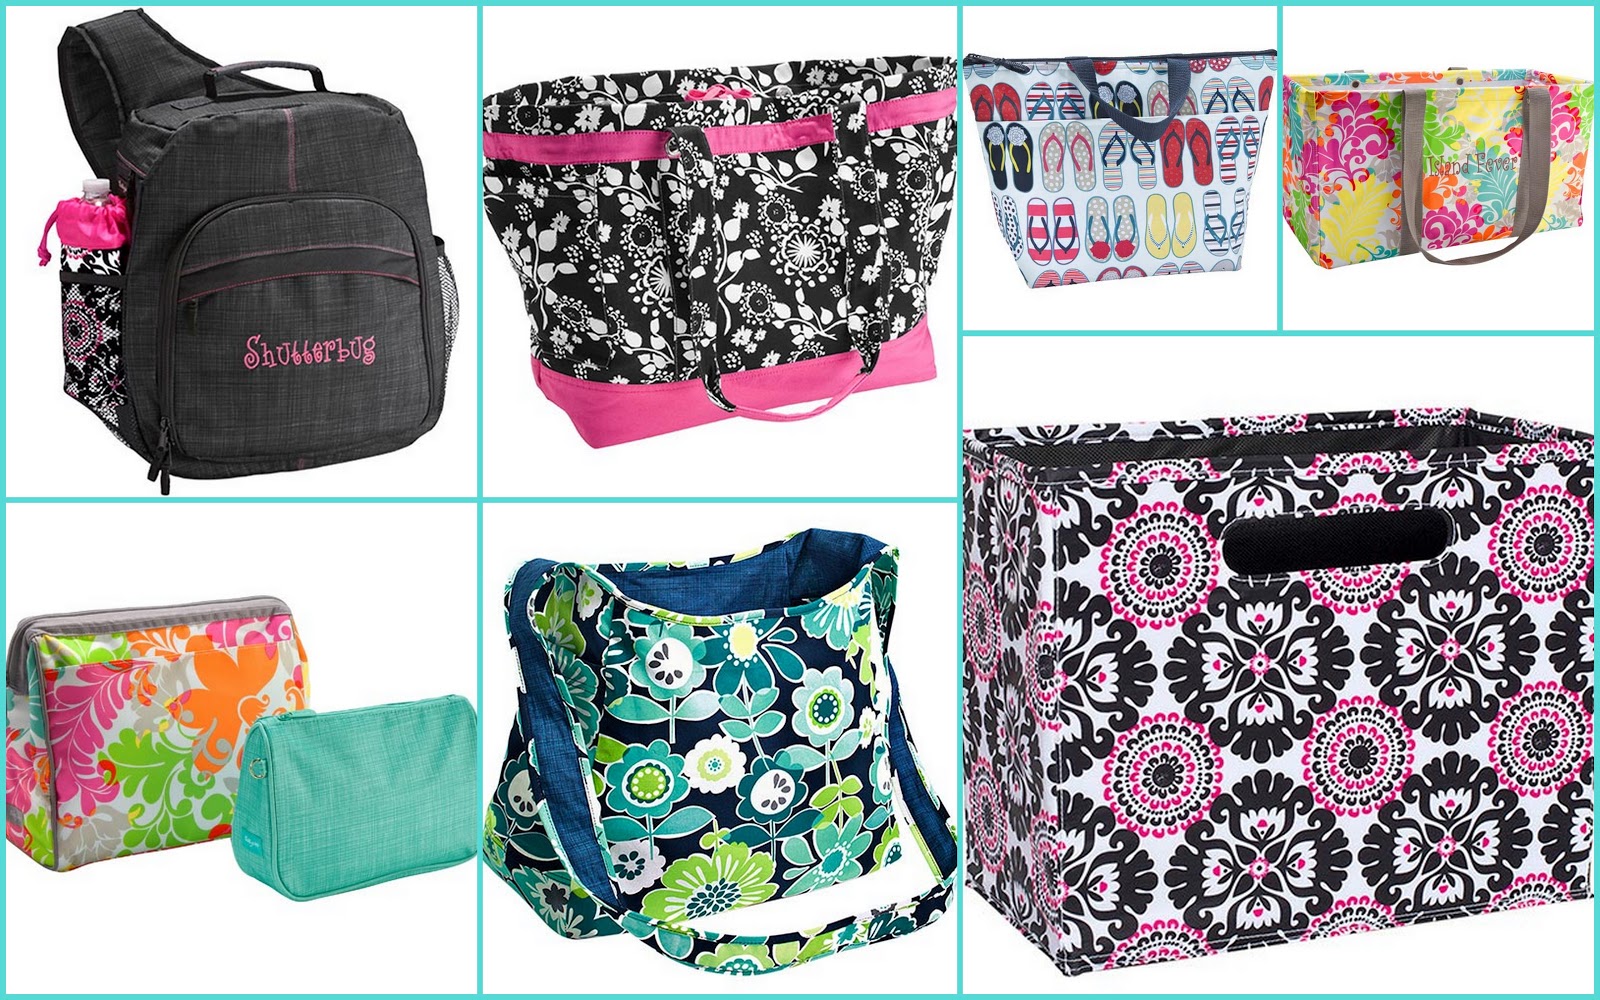 Review: Thirty-One Organizing Utility Tote